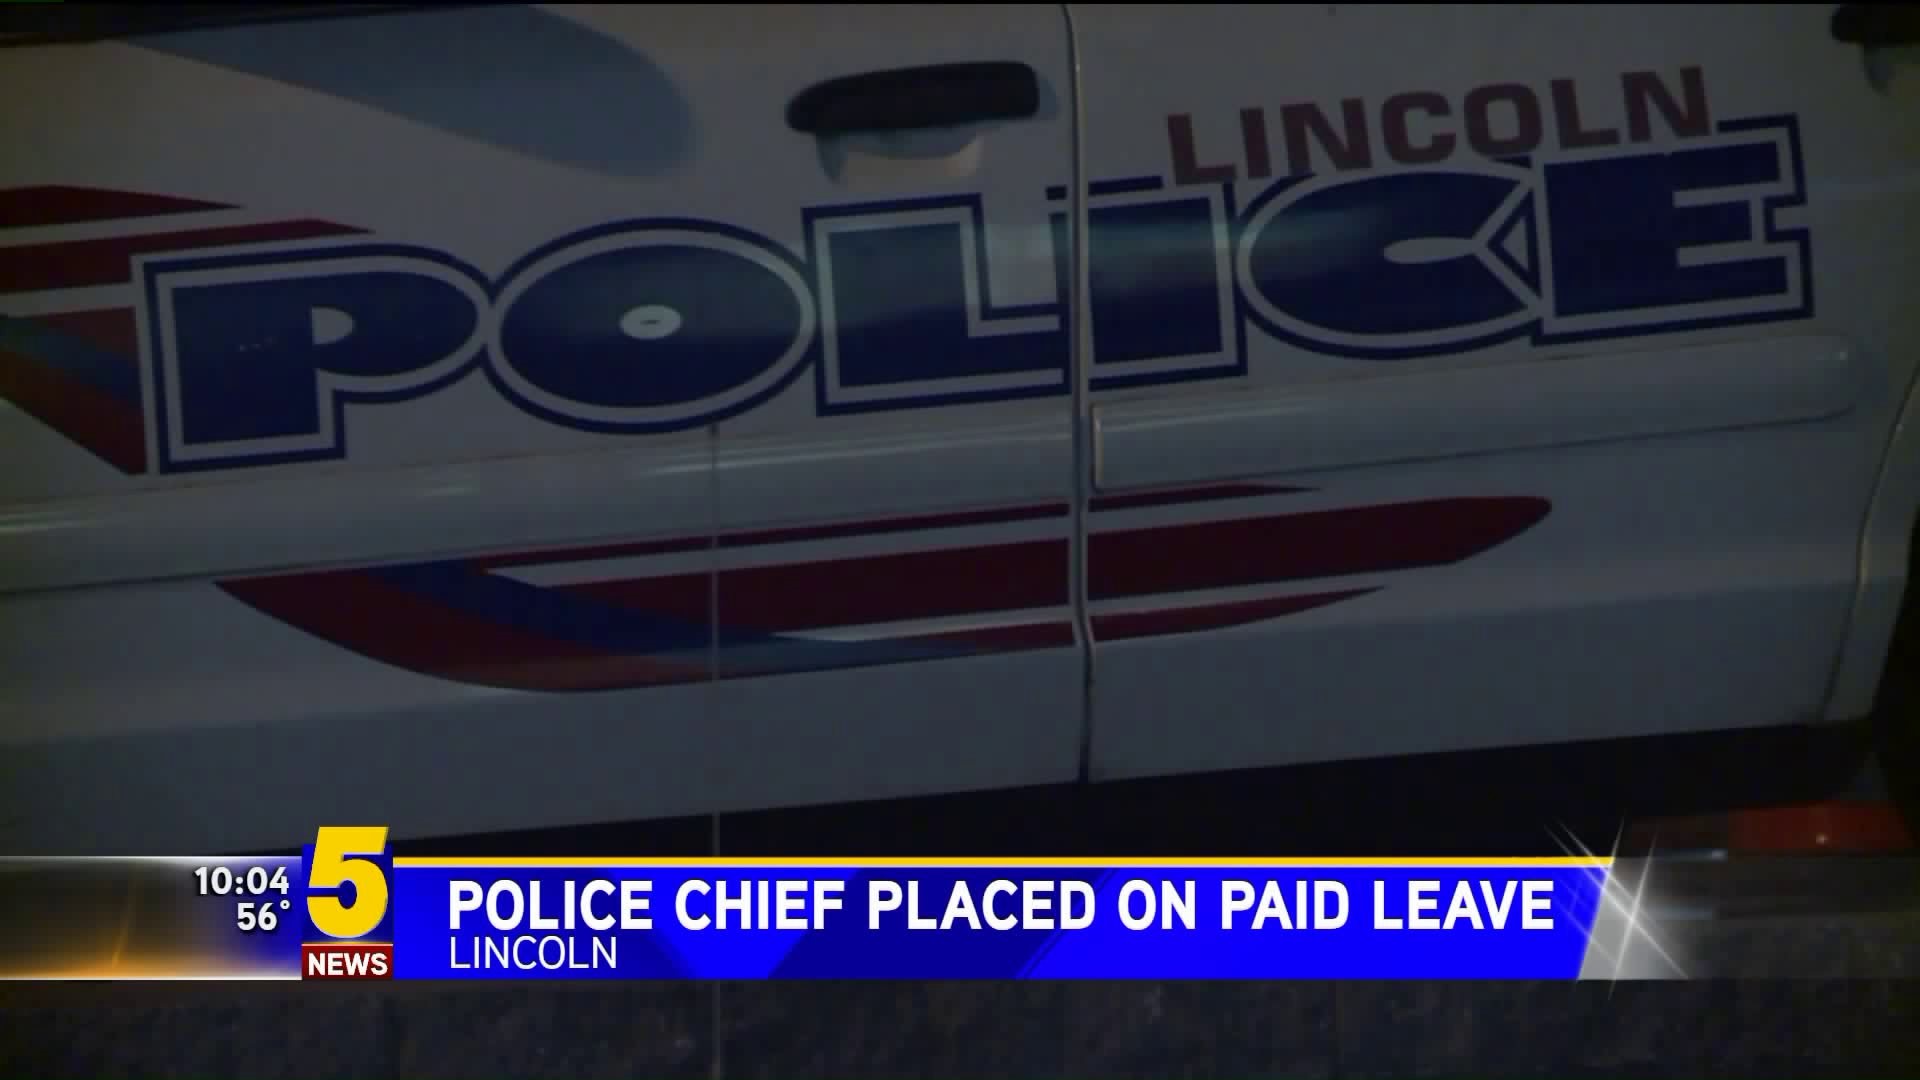 Lincoln Police Chief Placed On Paid Leave